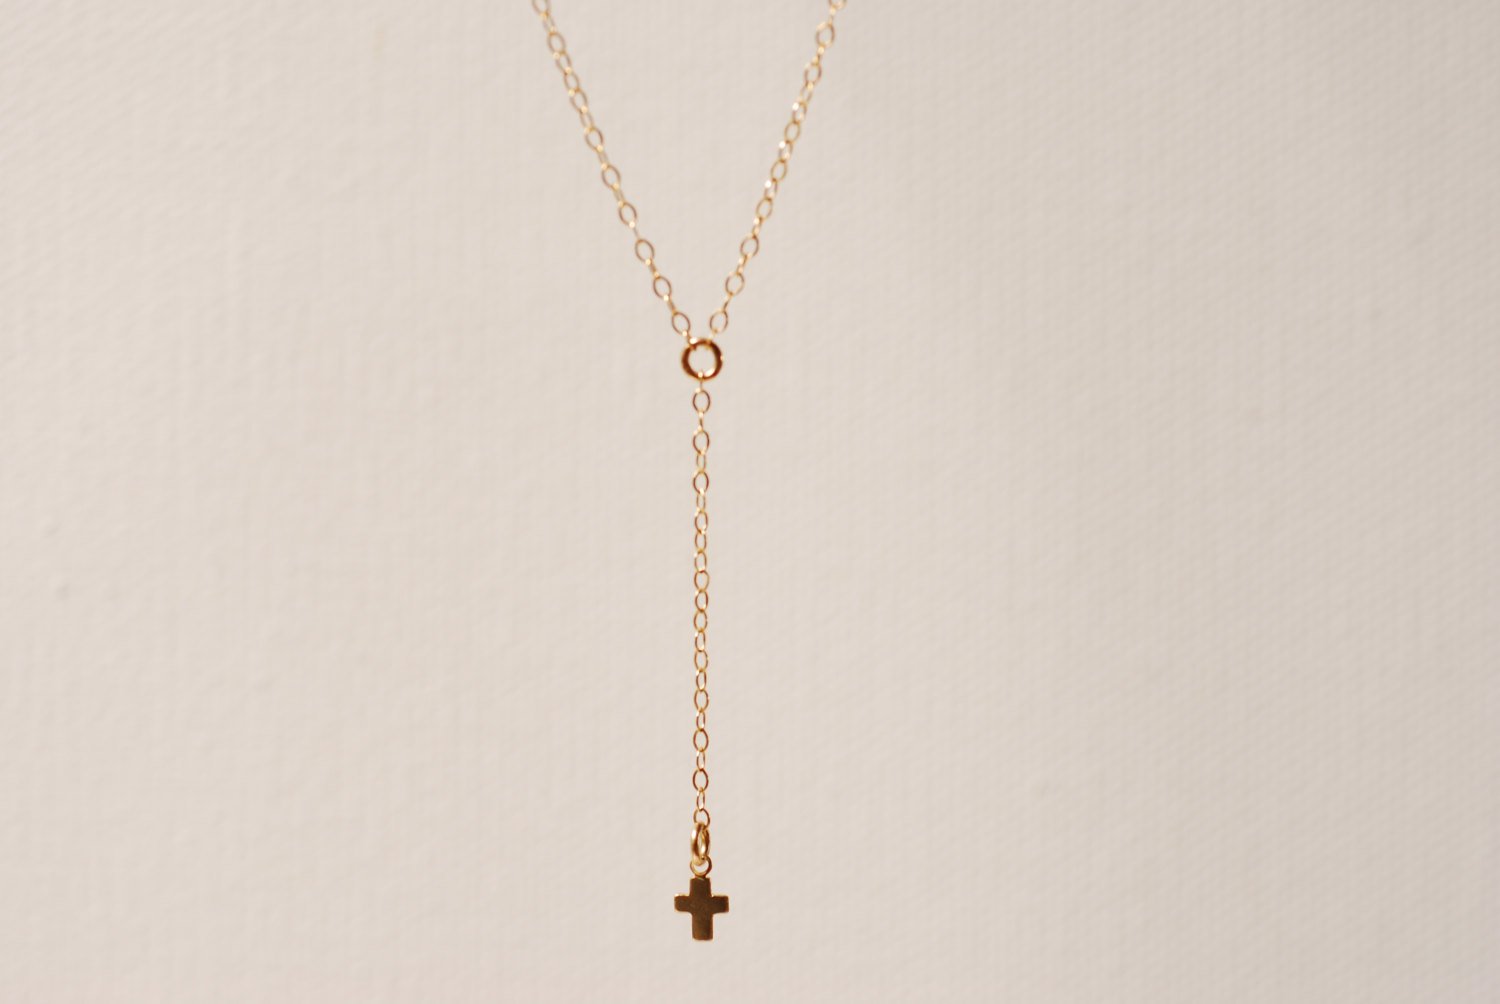 Gold Cross Rosary Lariat Necklace, 14k gold filled Cross, Gold Cross Necklace, Communion Gift, Bridesmaid Jewelry,dainty rosary - HarperCrown